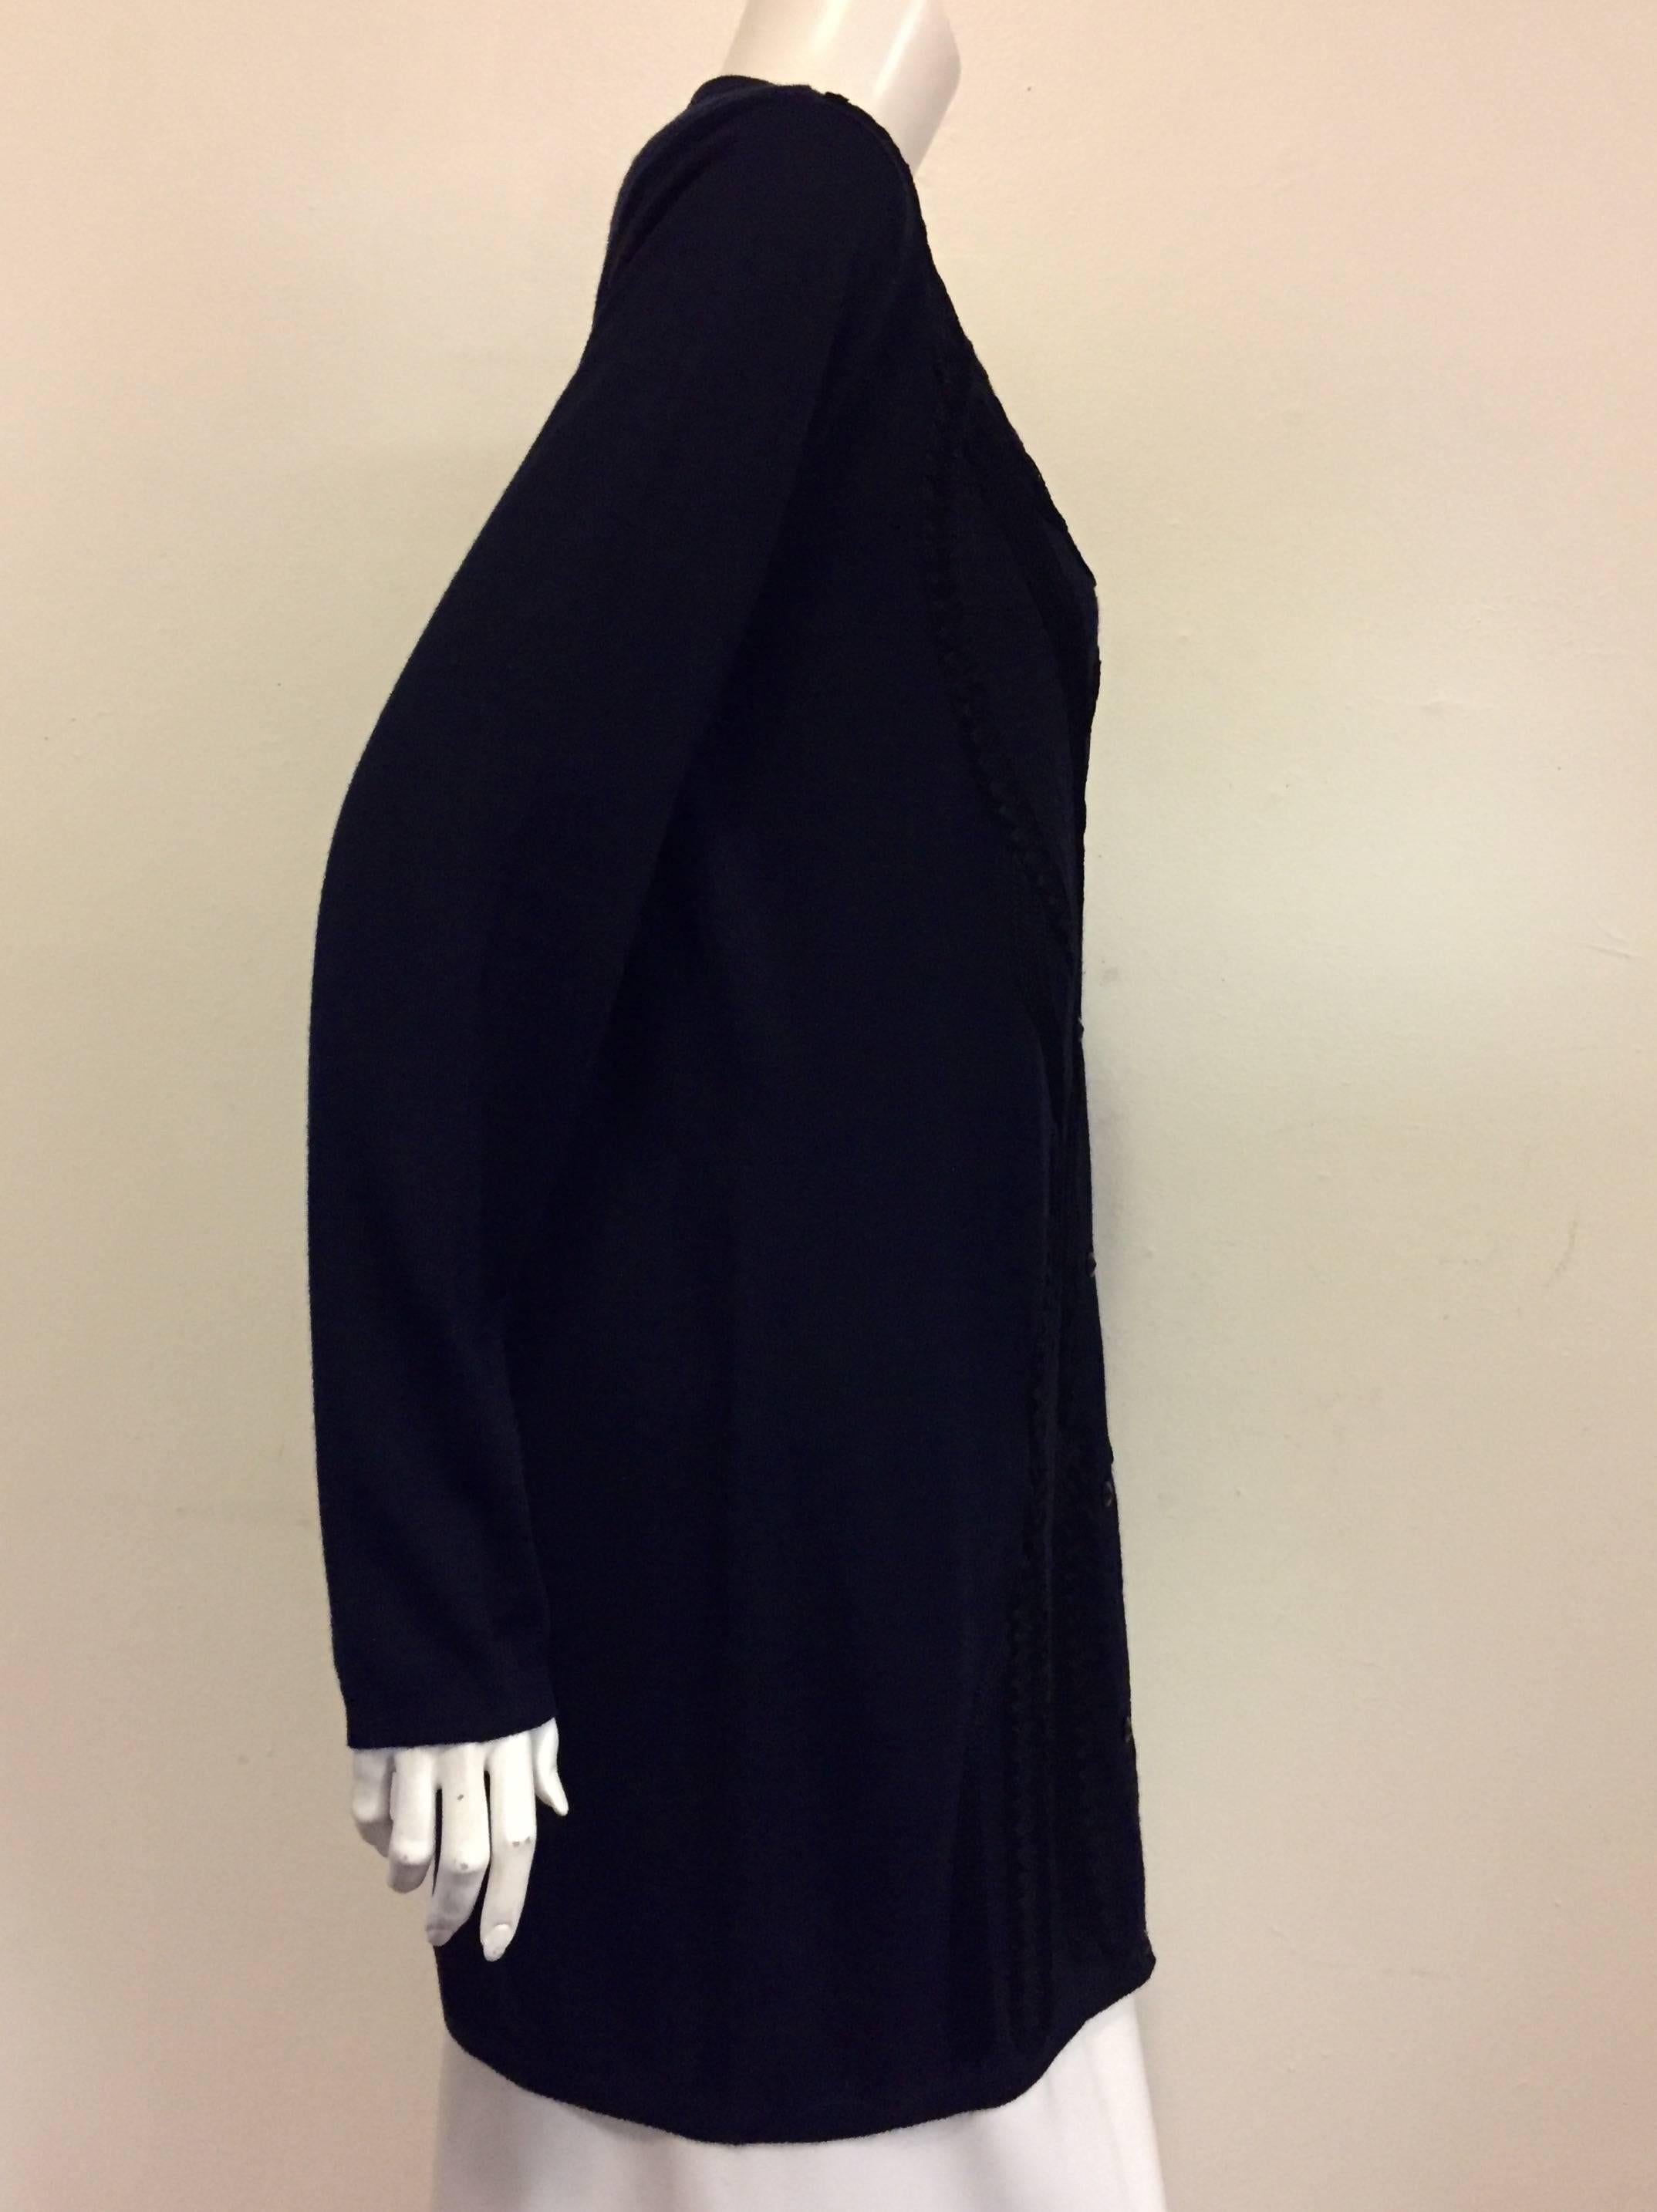 Elegant Escada Navy twinset is a classic design that promises many years of luxurious wear!  Features a sophisticated 70% Wool/30% Silk knit, longer length, and eight button front closure.  Ribbed hem, cuffs and neckline finish the look.  The 